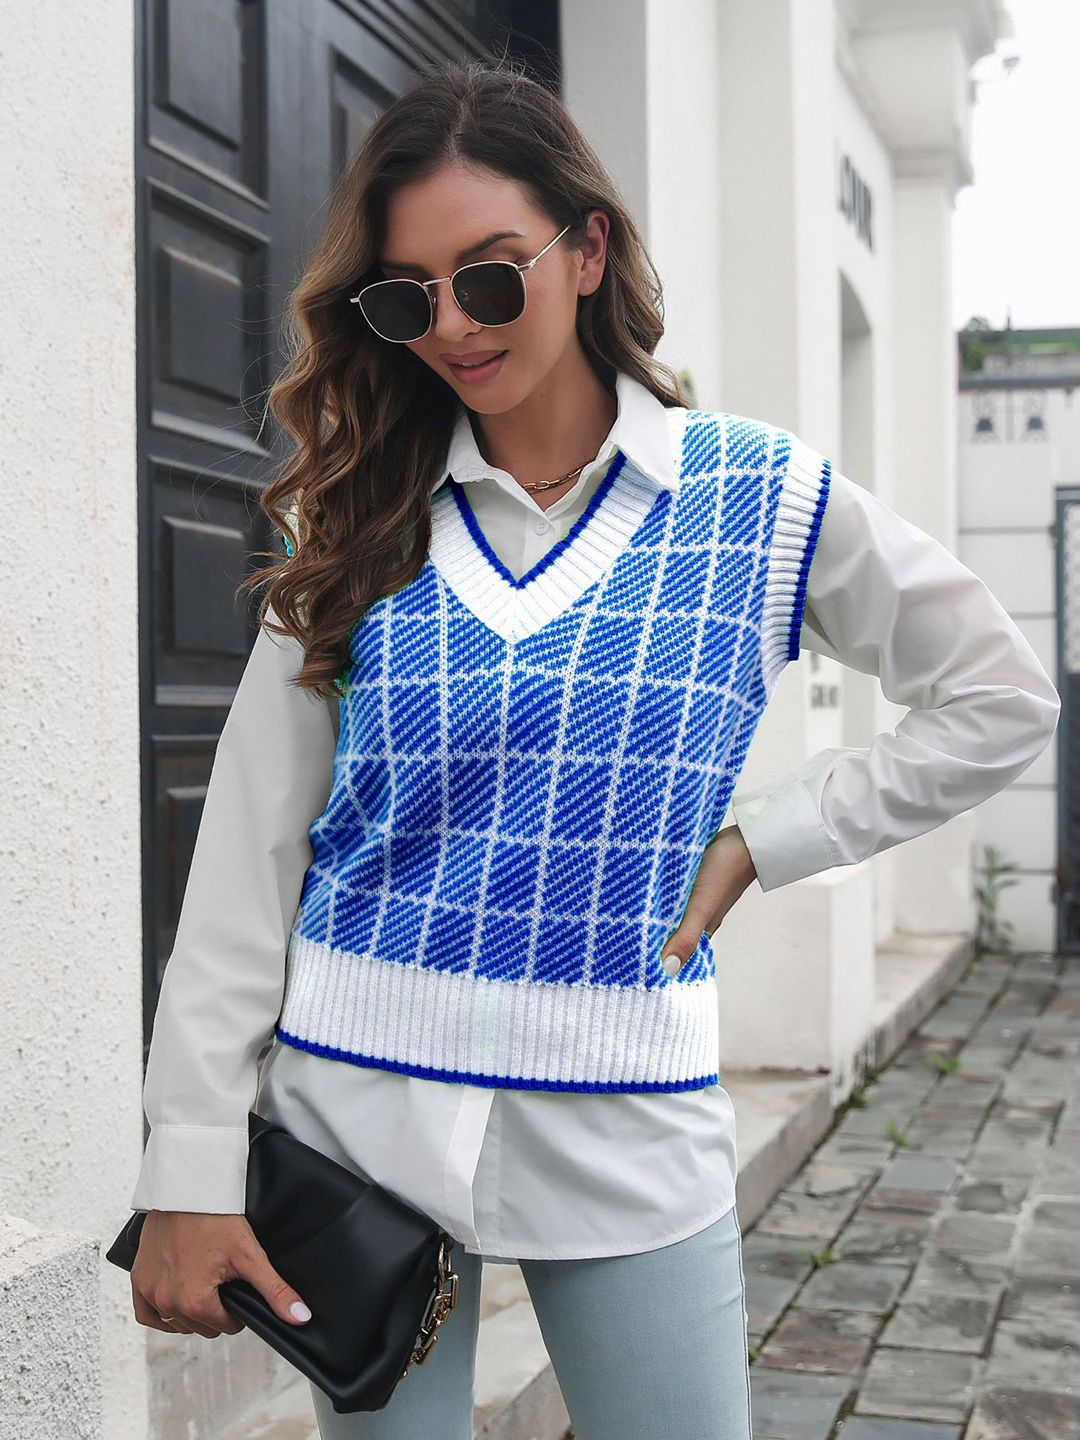 BoStreet Women Blue & White Checked Sweater Price in India